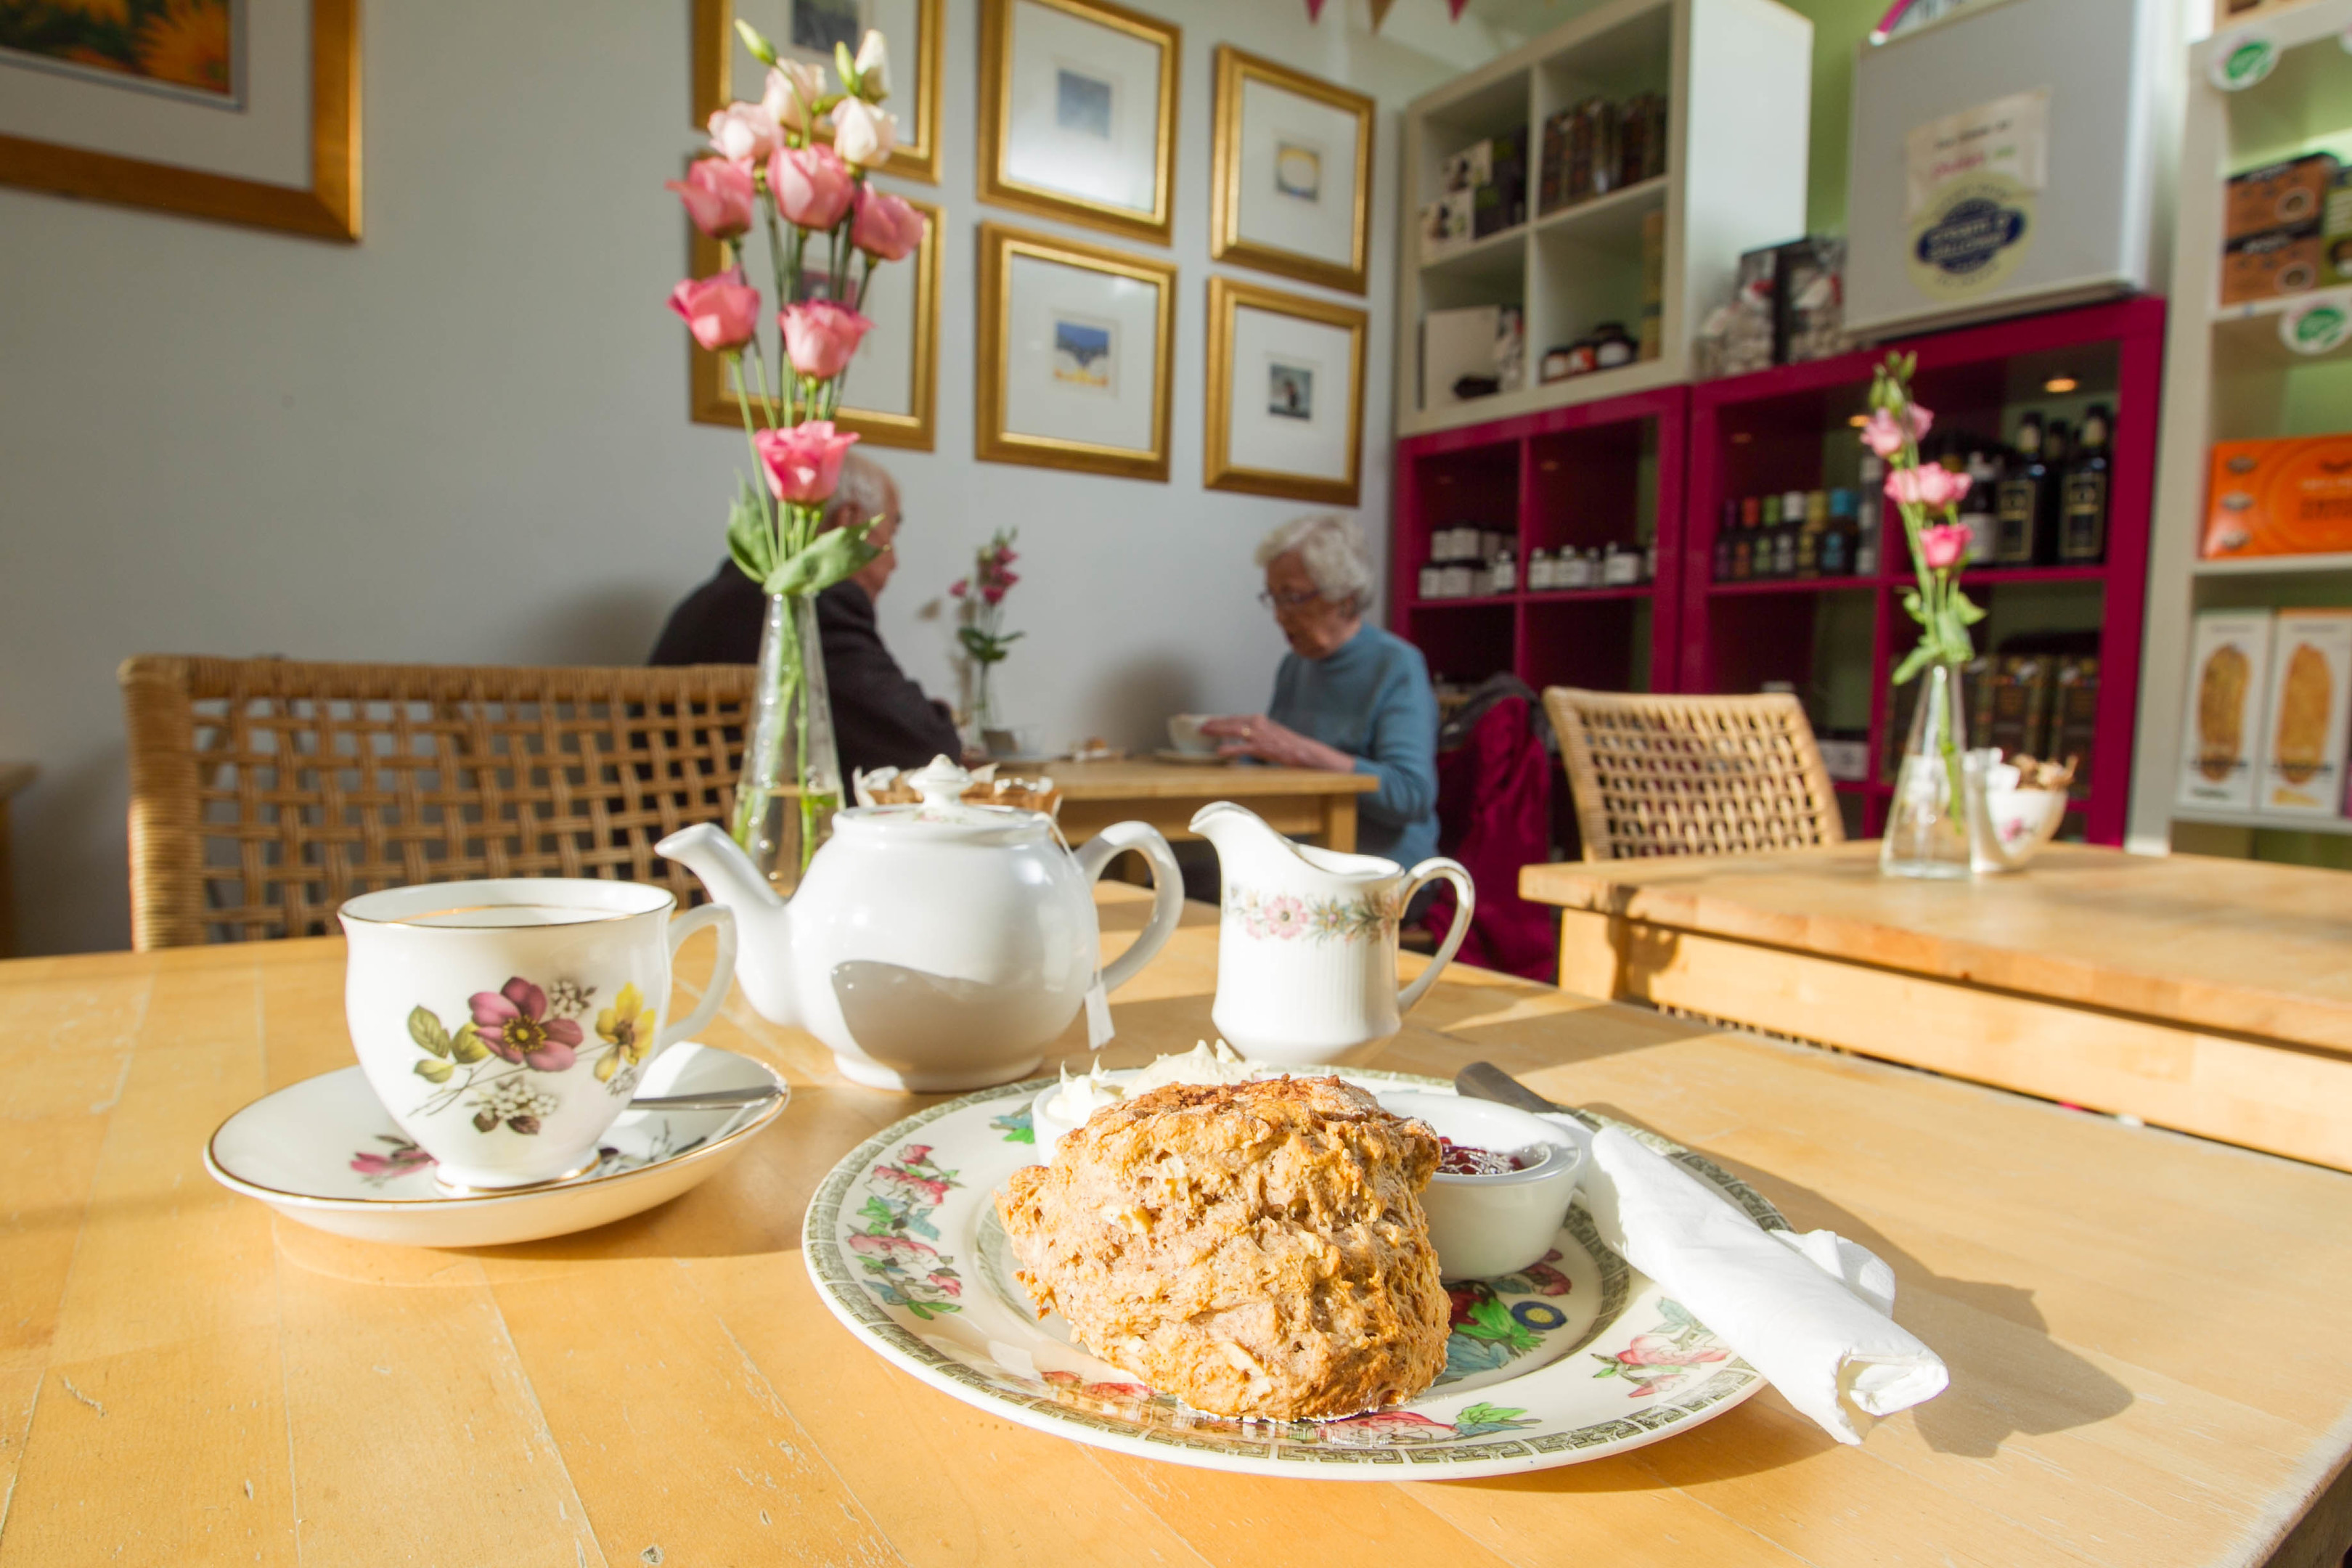 Rhubarb and Lime Scone Spy in Kippen. (Andrew Cawley)